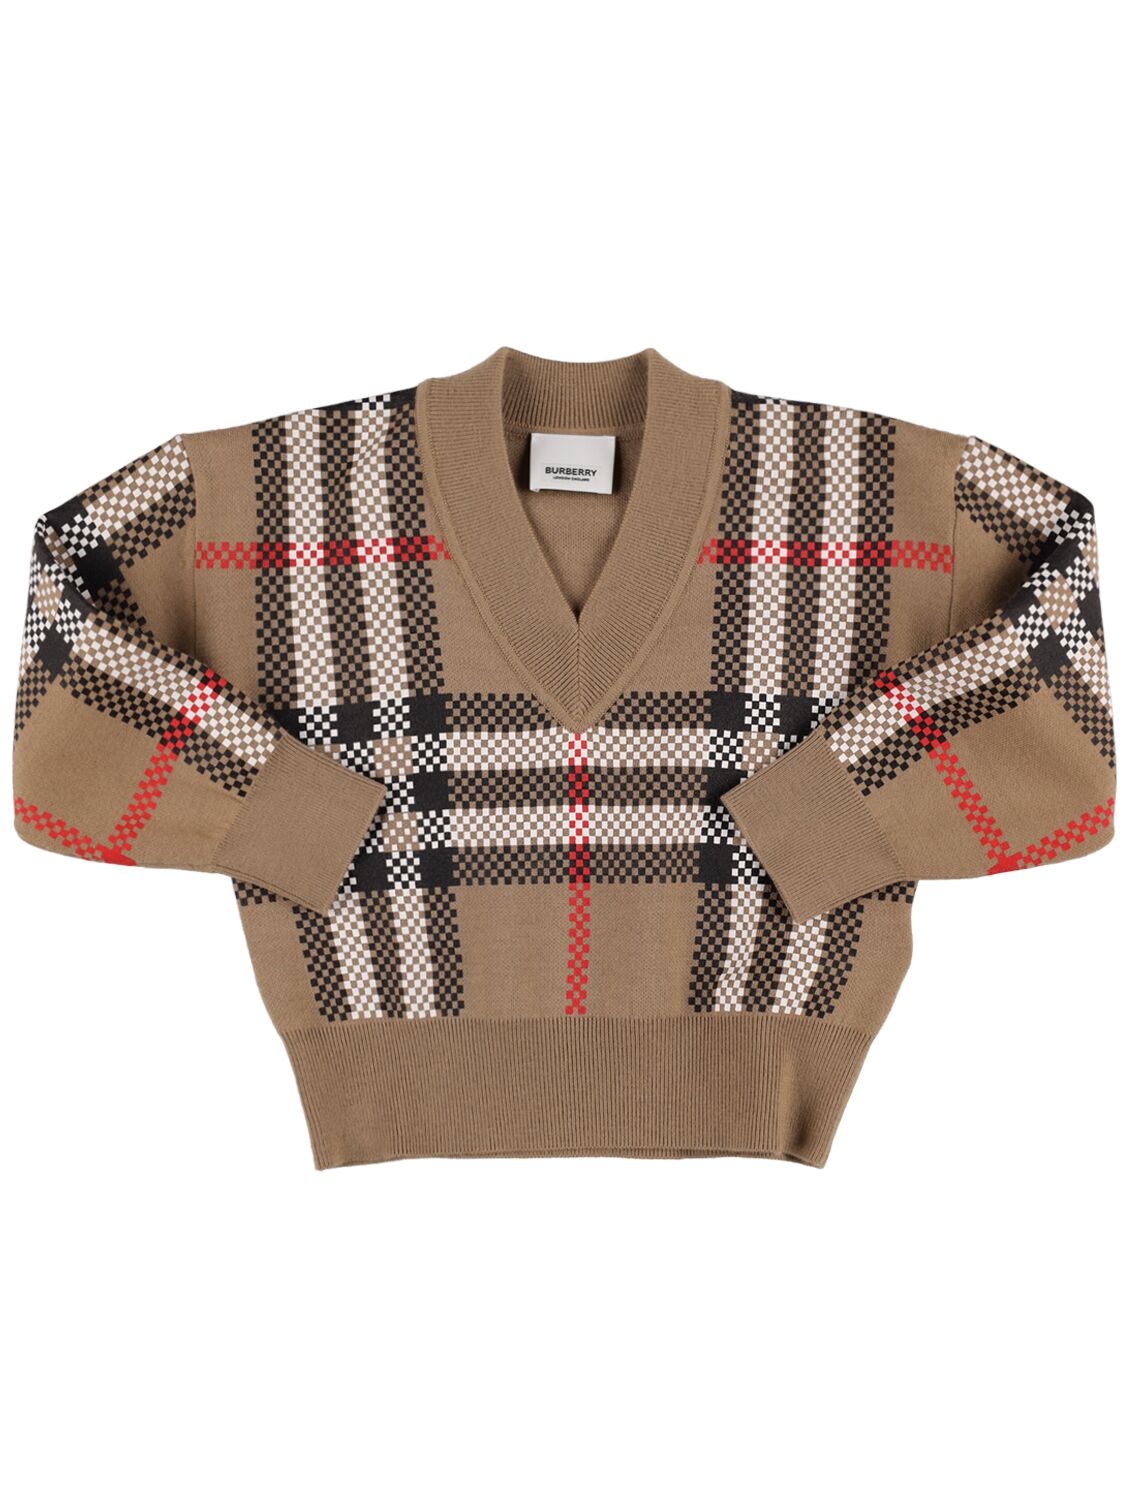 Image of Check Print Wool Blend Knit Sweater